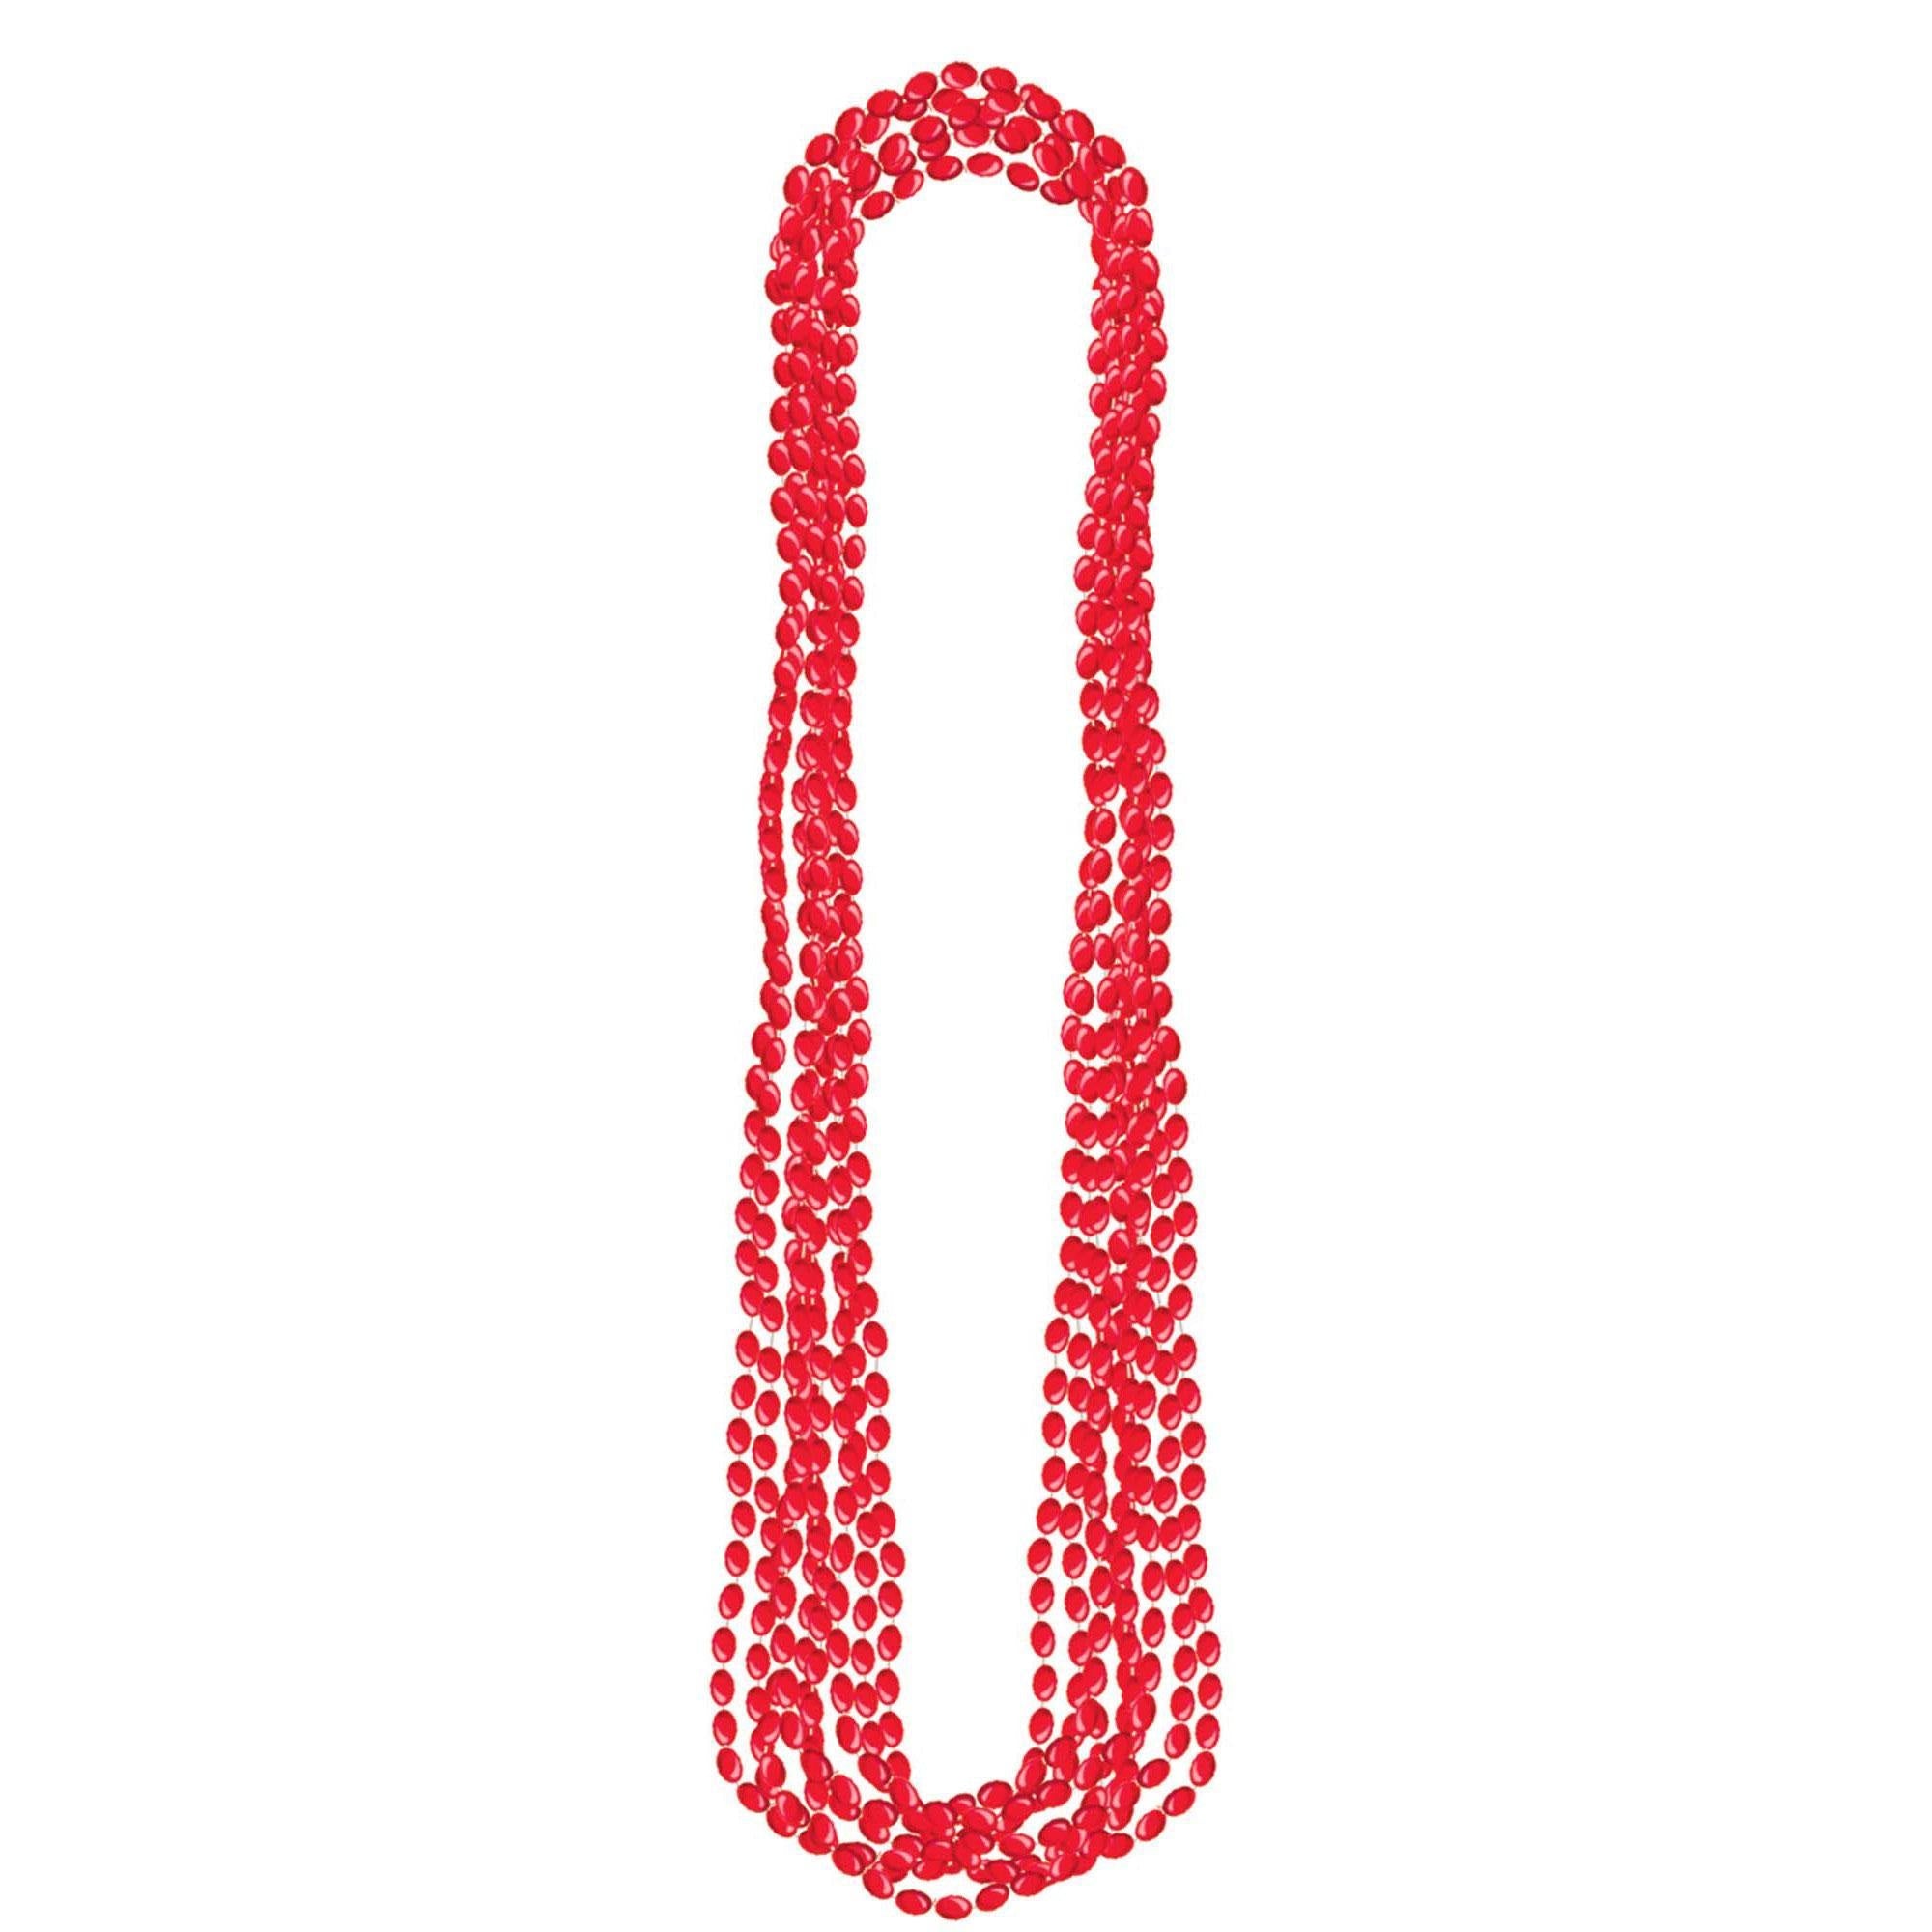 Metallic Red Necklaces 8pcs Costumes & Apparel - Party Centre